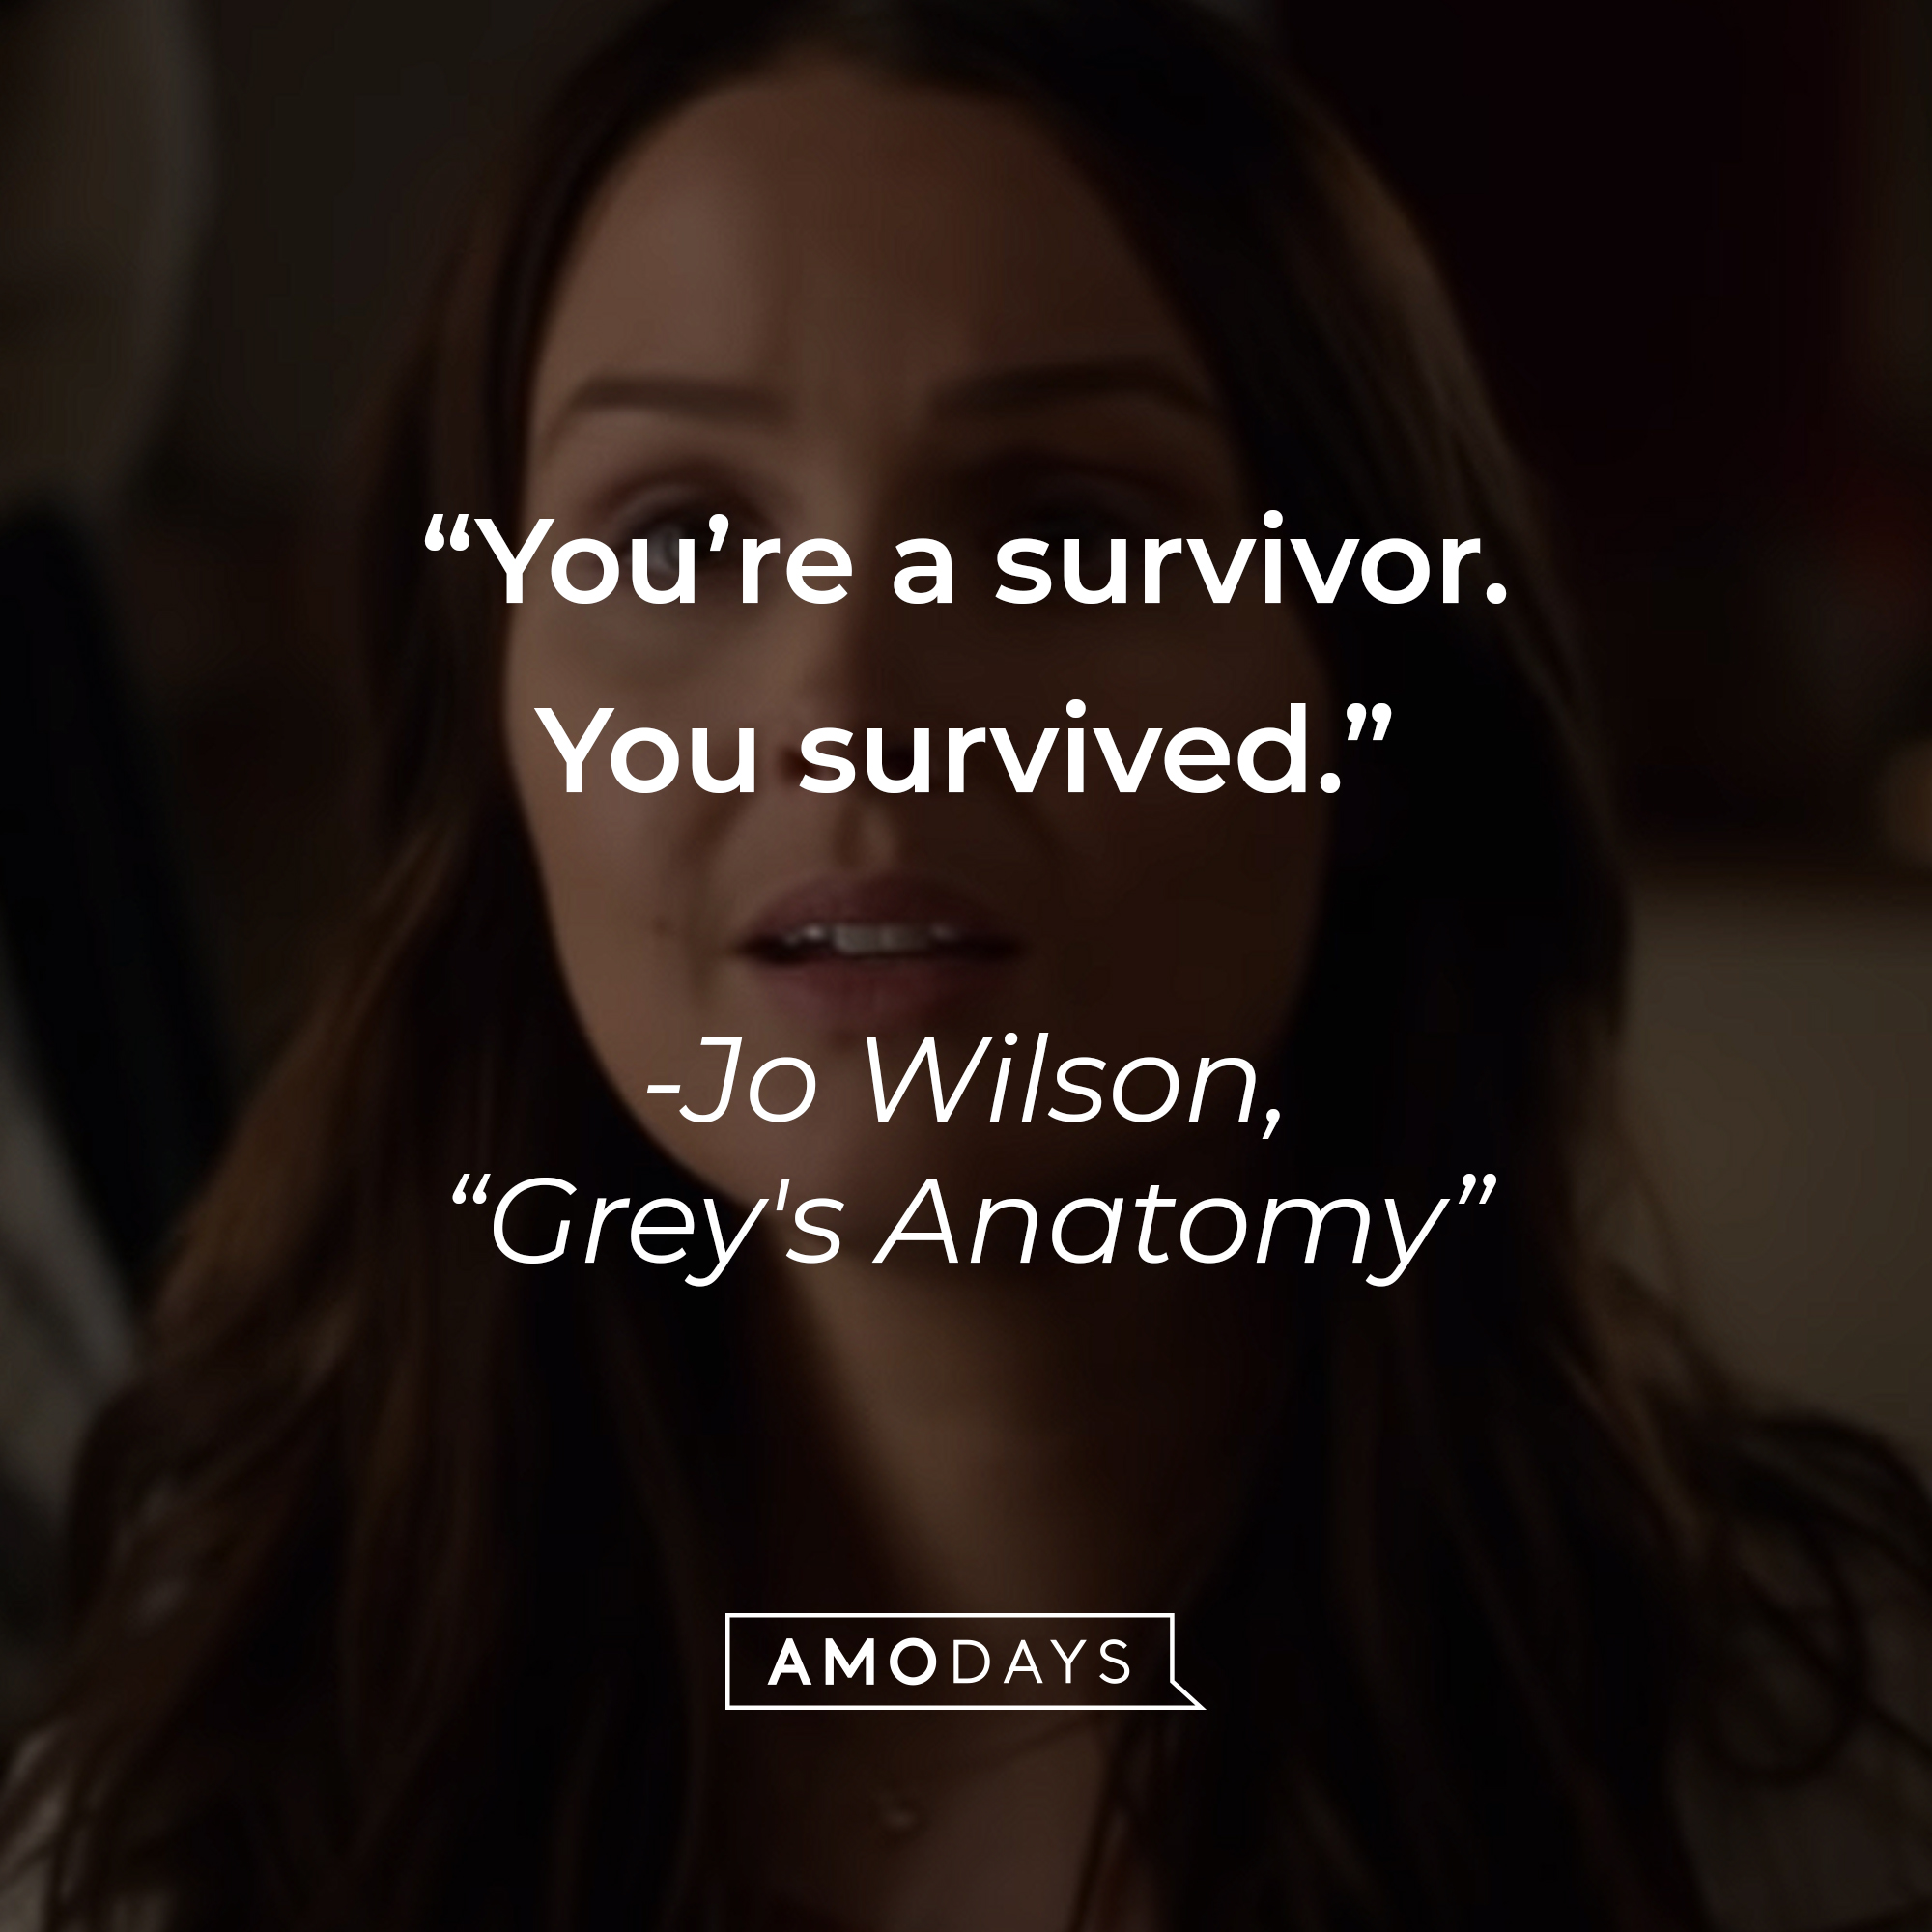 Jo Wilson’s quote from “Grey’s Anatomy”: “You’re a survivor. You survived.” | Source: youtube.com/ABCNetwork